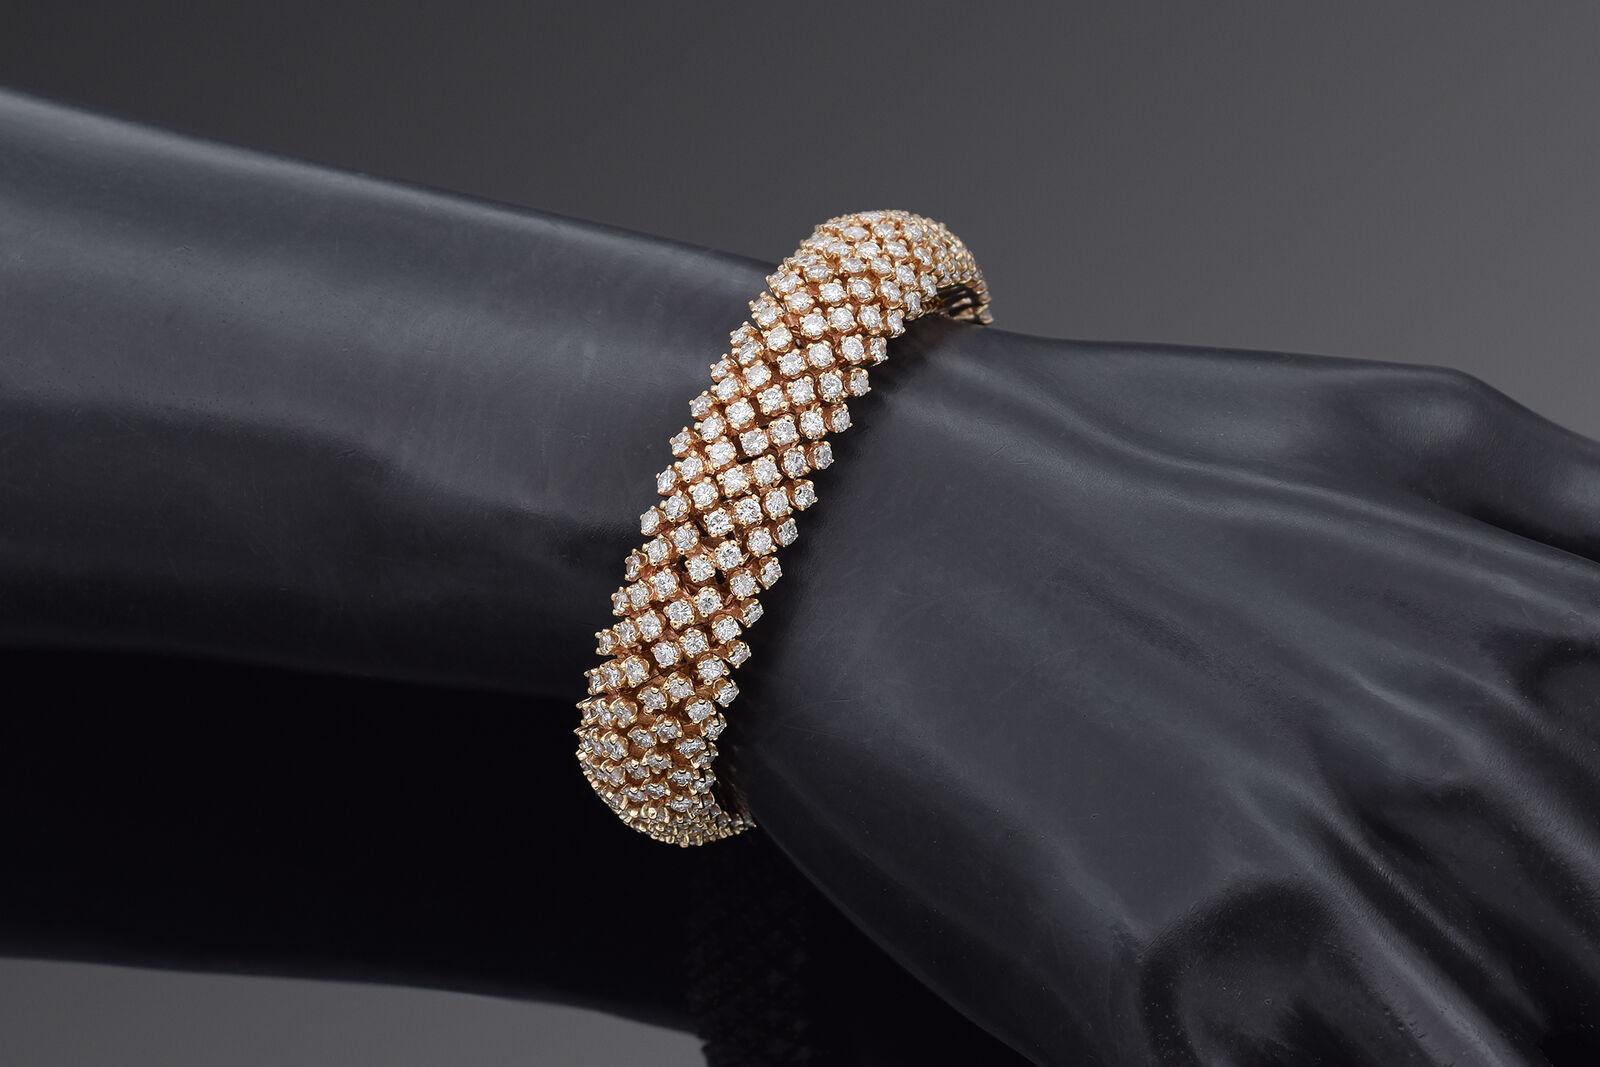 An amazing 14K yellow gold bracelet with 315 diamonds weighing 0.03ct each, totaling 9.45 total carat weight. The bracelet weighs 57 grams and measures 13.7mm wide. The bracelet length is 5.75 inches. Bracelet is stamped 14K.